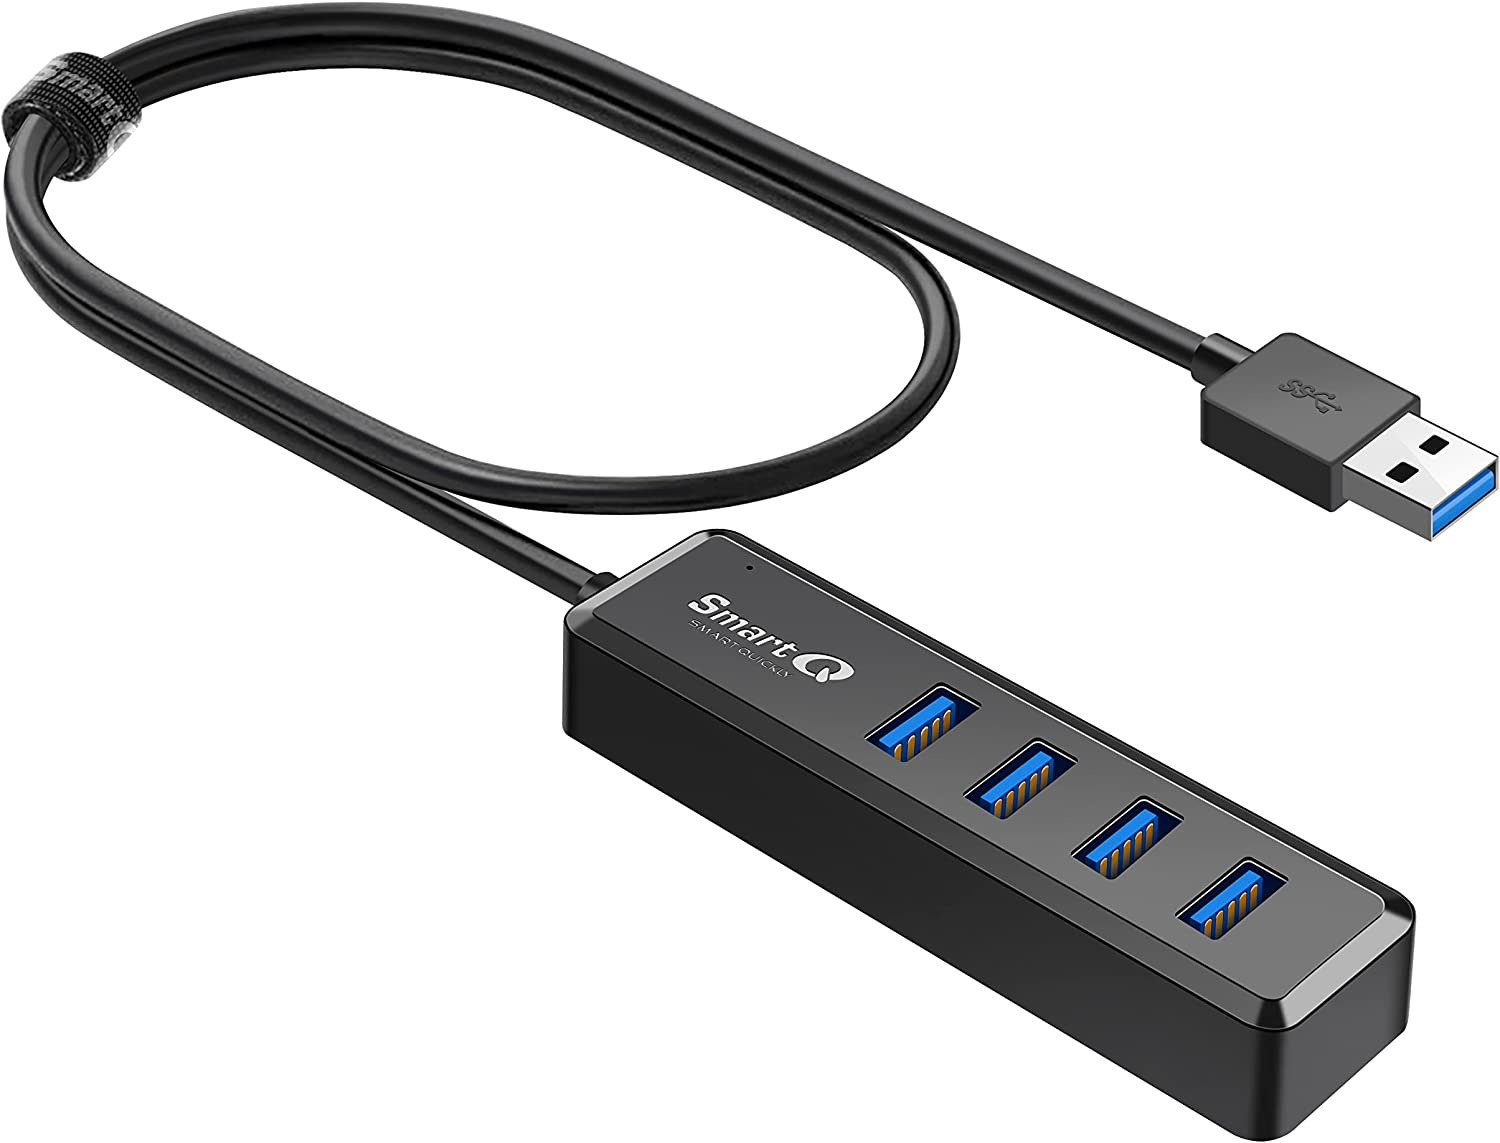 H302S USB 3.0 Hub for Laptop with 2Ft Long Cable, Multi Port Expander, Fast Data